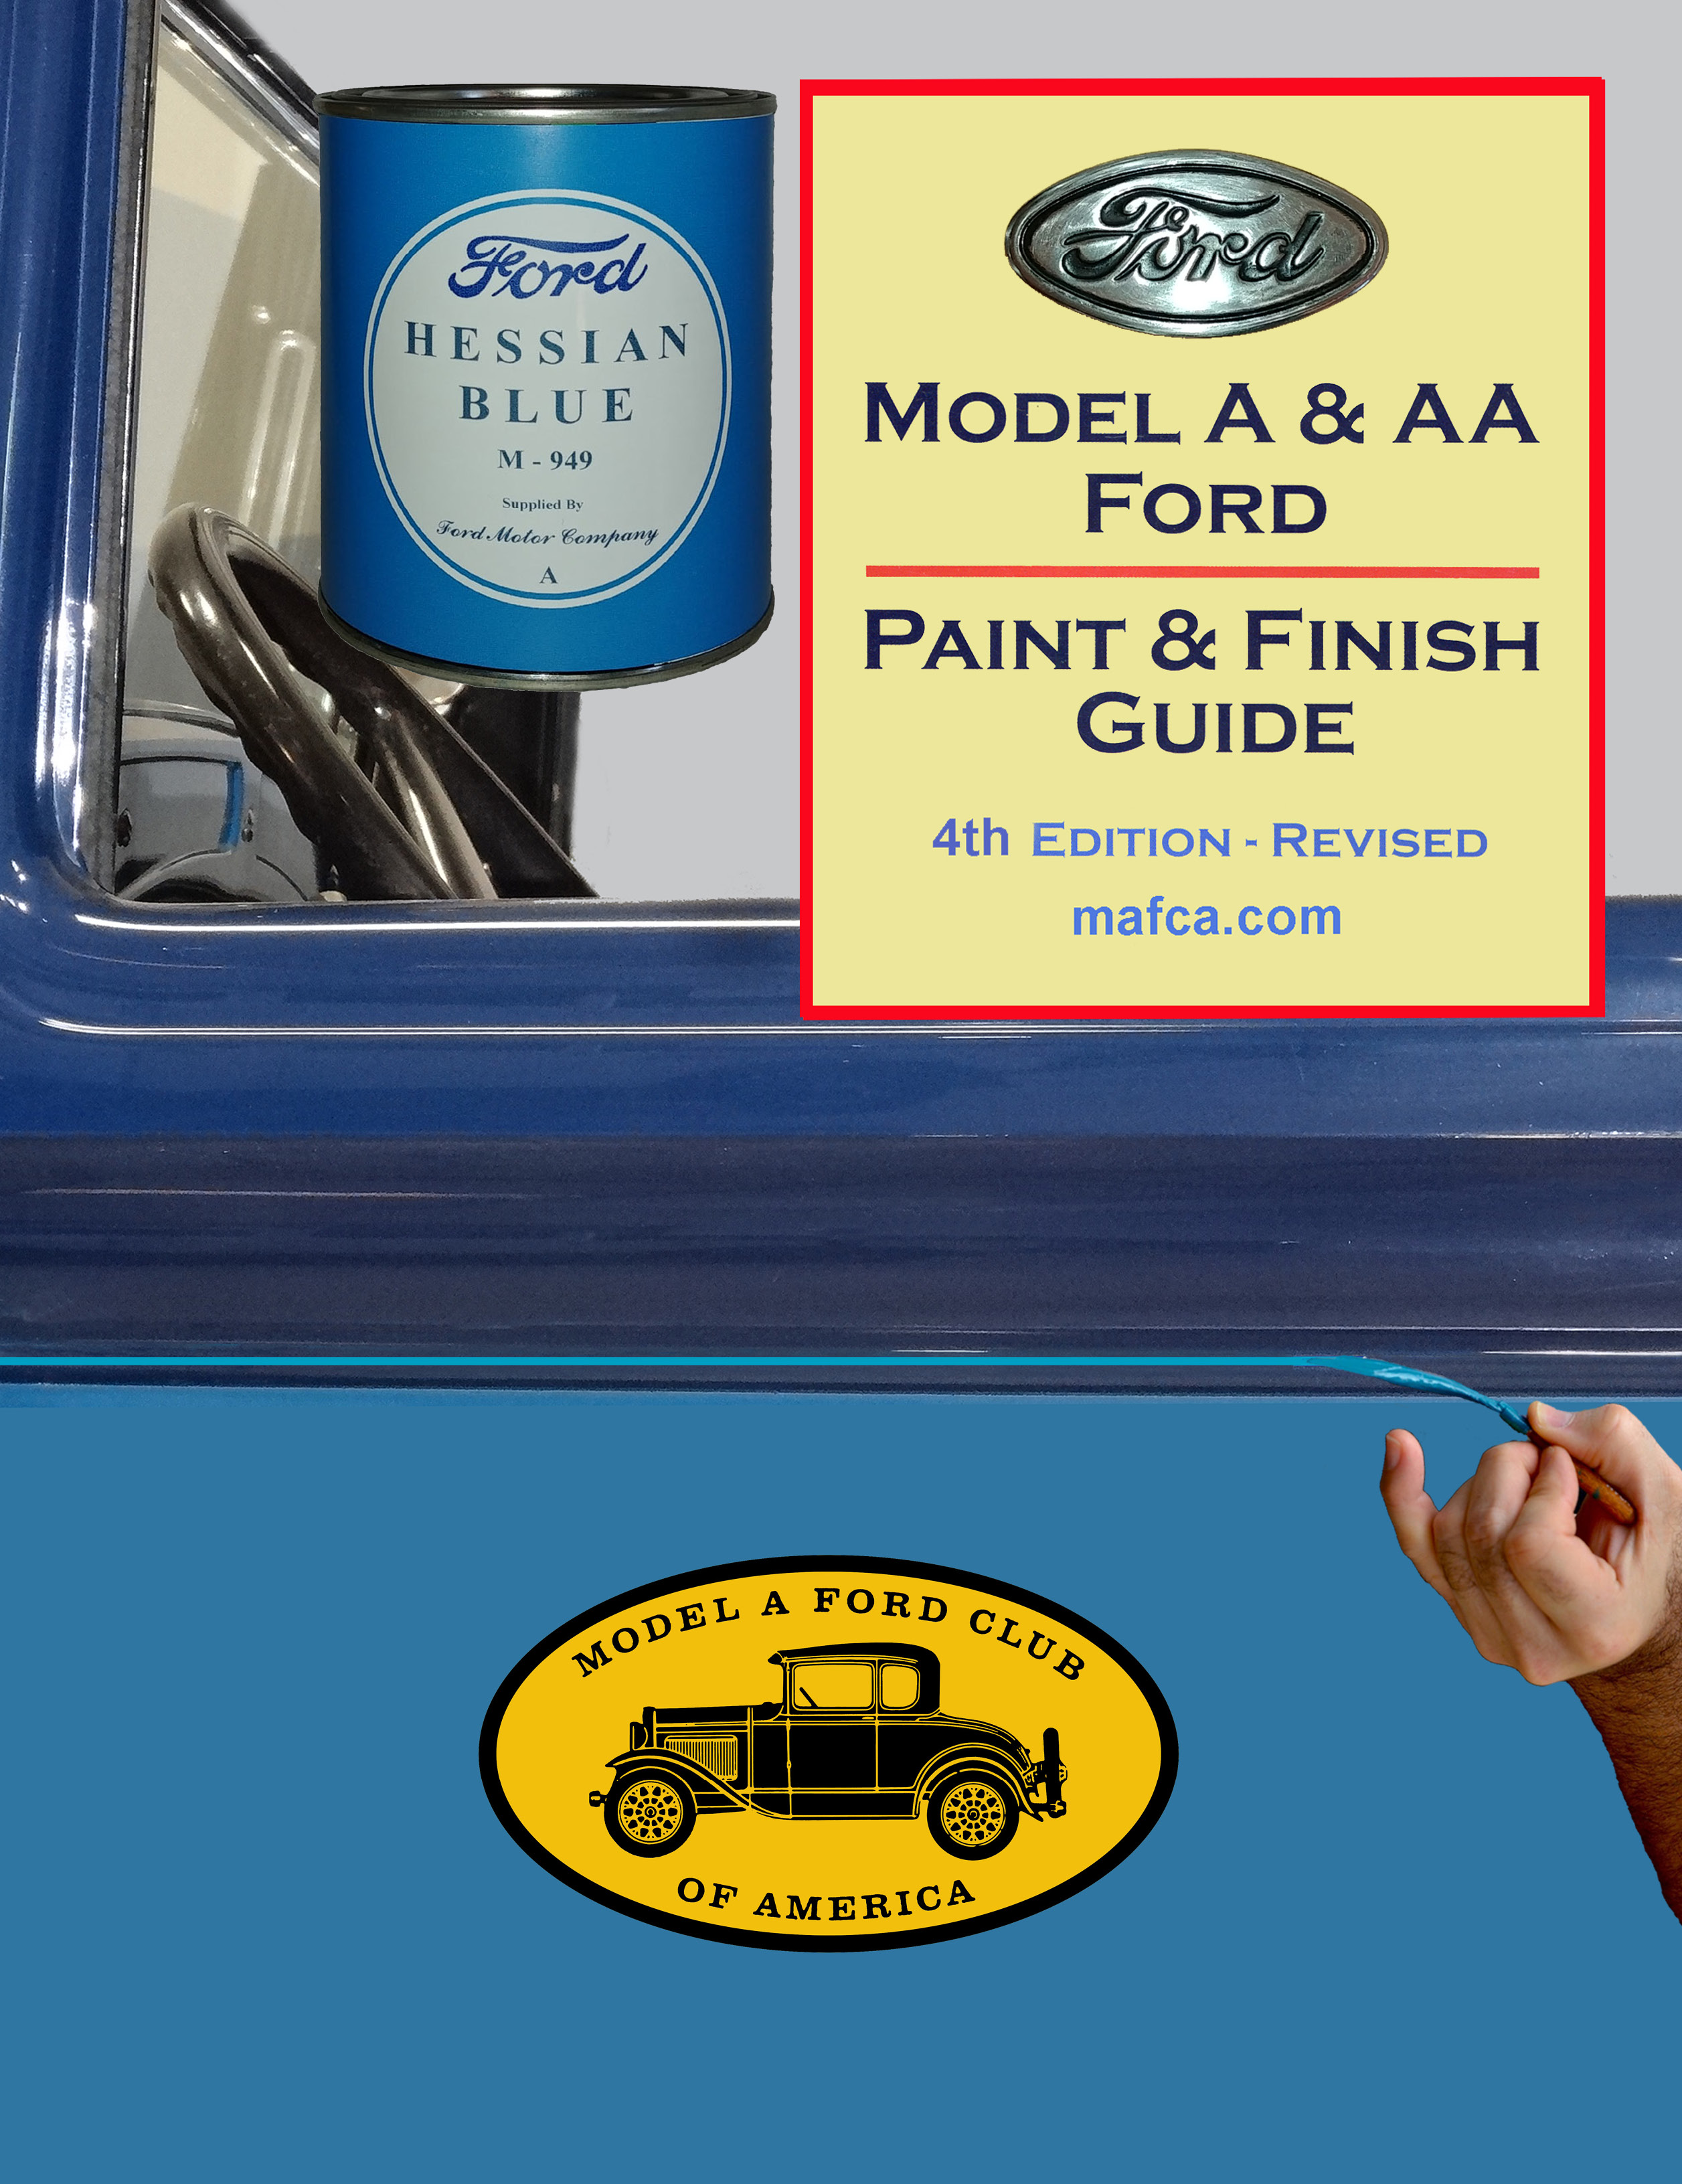 *New* Revised Paint and Finish Guide - 4th edition